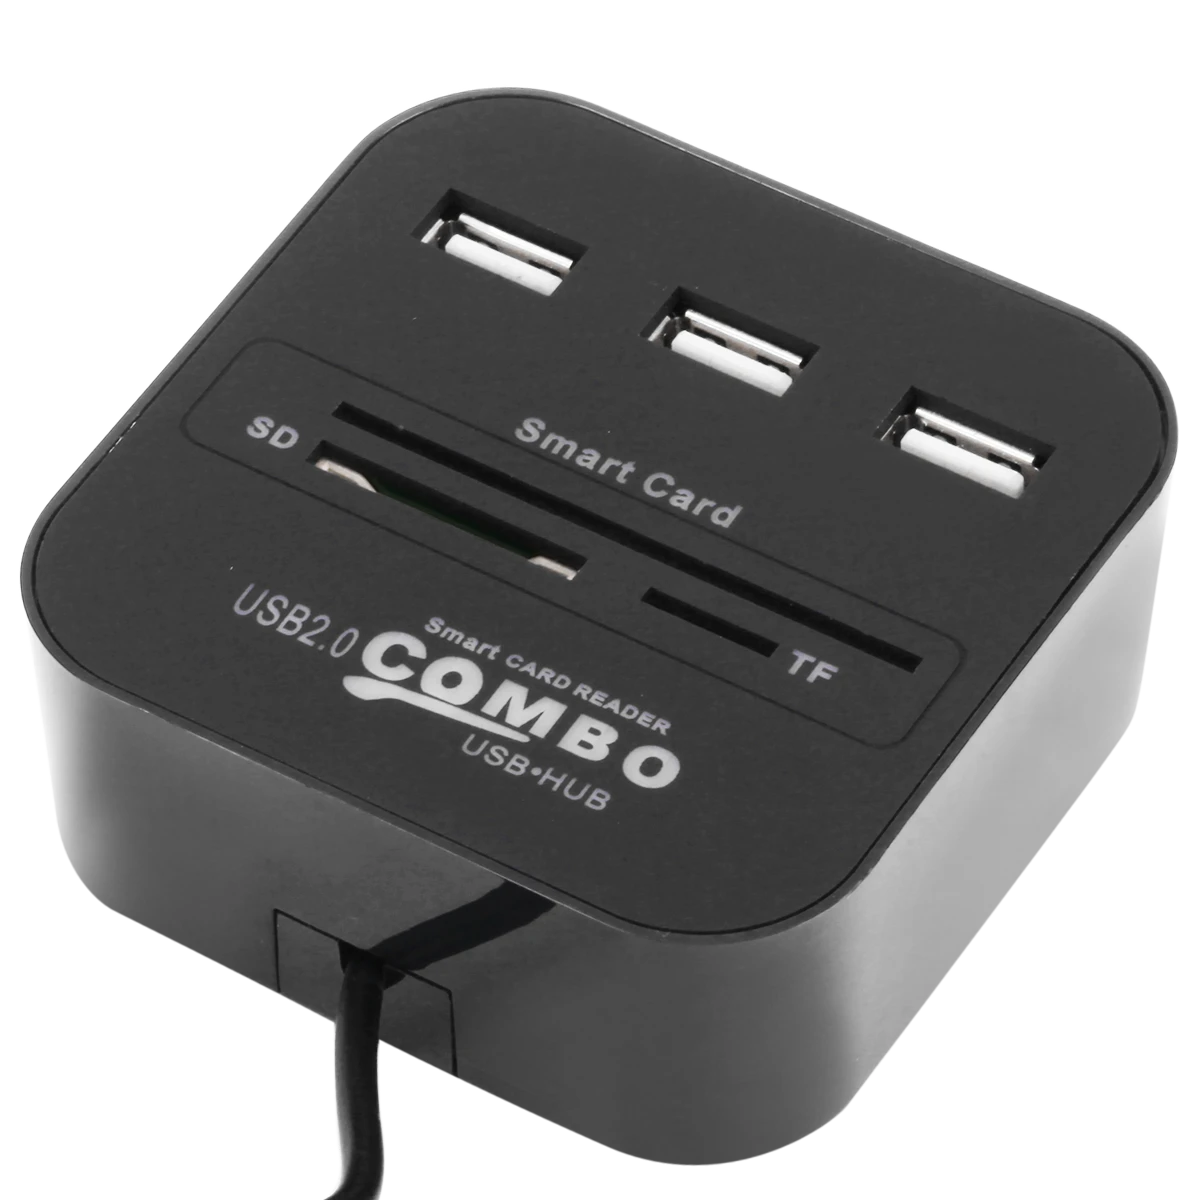 Buy Support Smart Id Card Tf Sd Mmc Card Usb2.0 Hub 3 Port Usb Hub Multi Usb Combo Card Reader Driver from Shenzhen Zhimeituo Industry Limited Company, China |